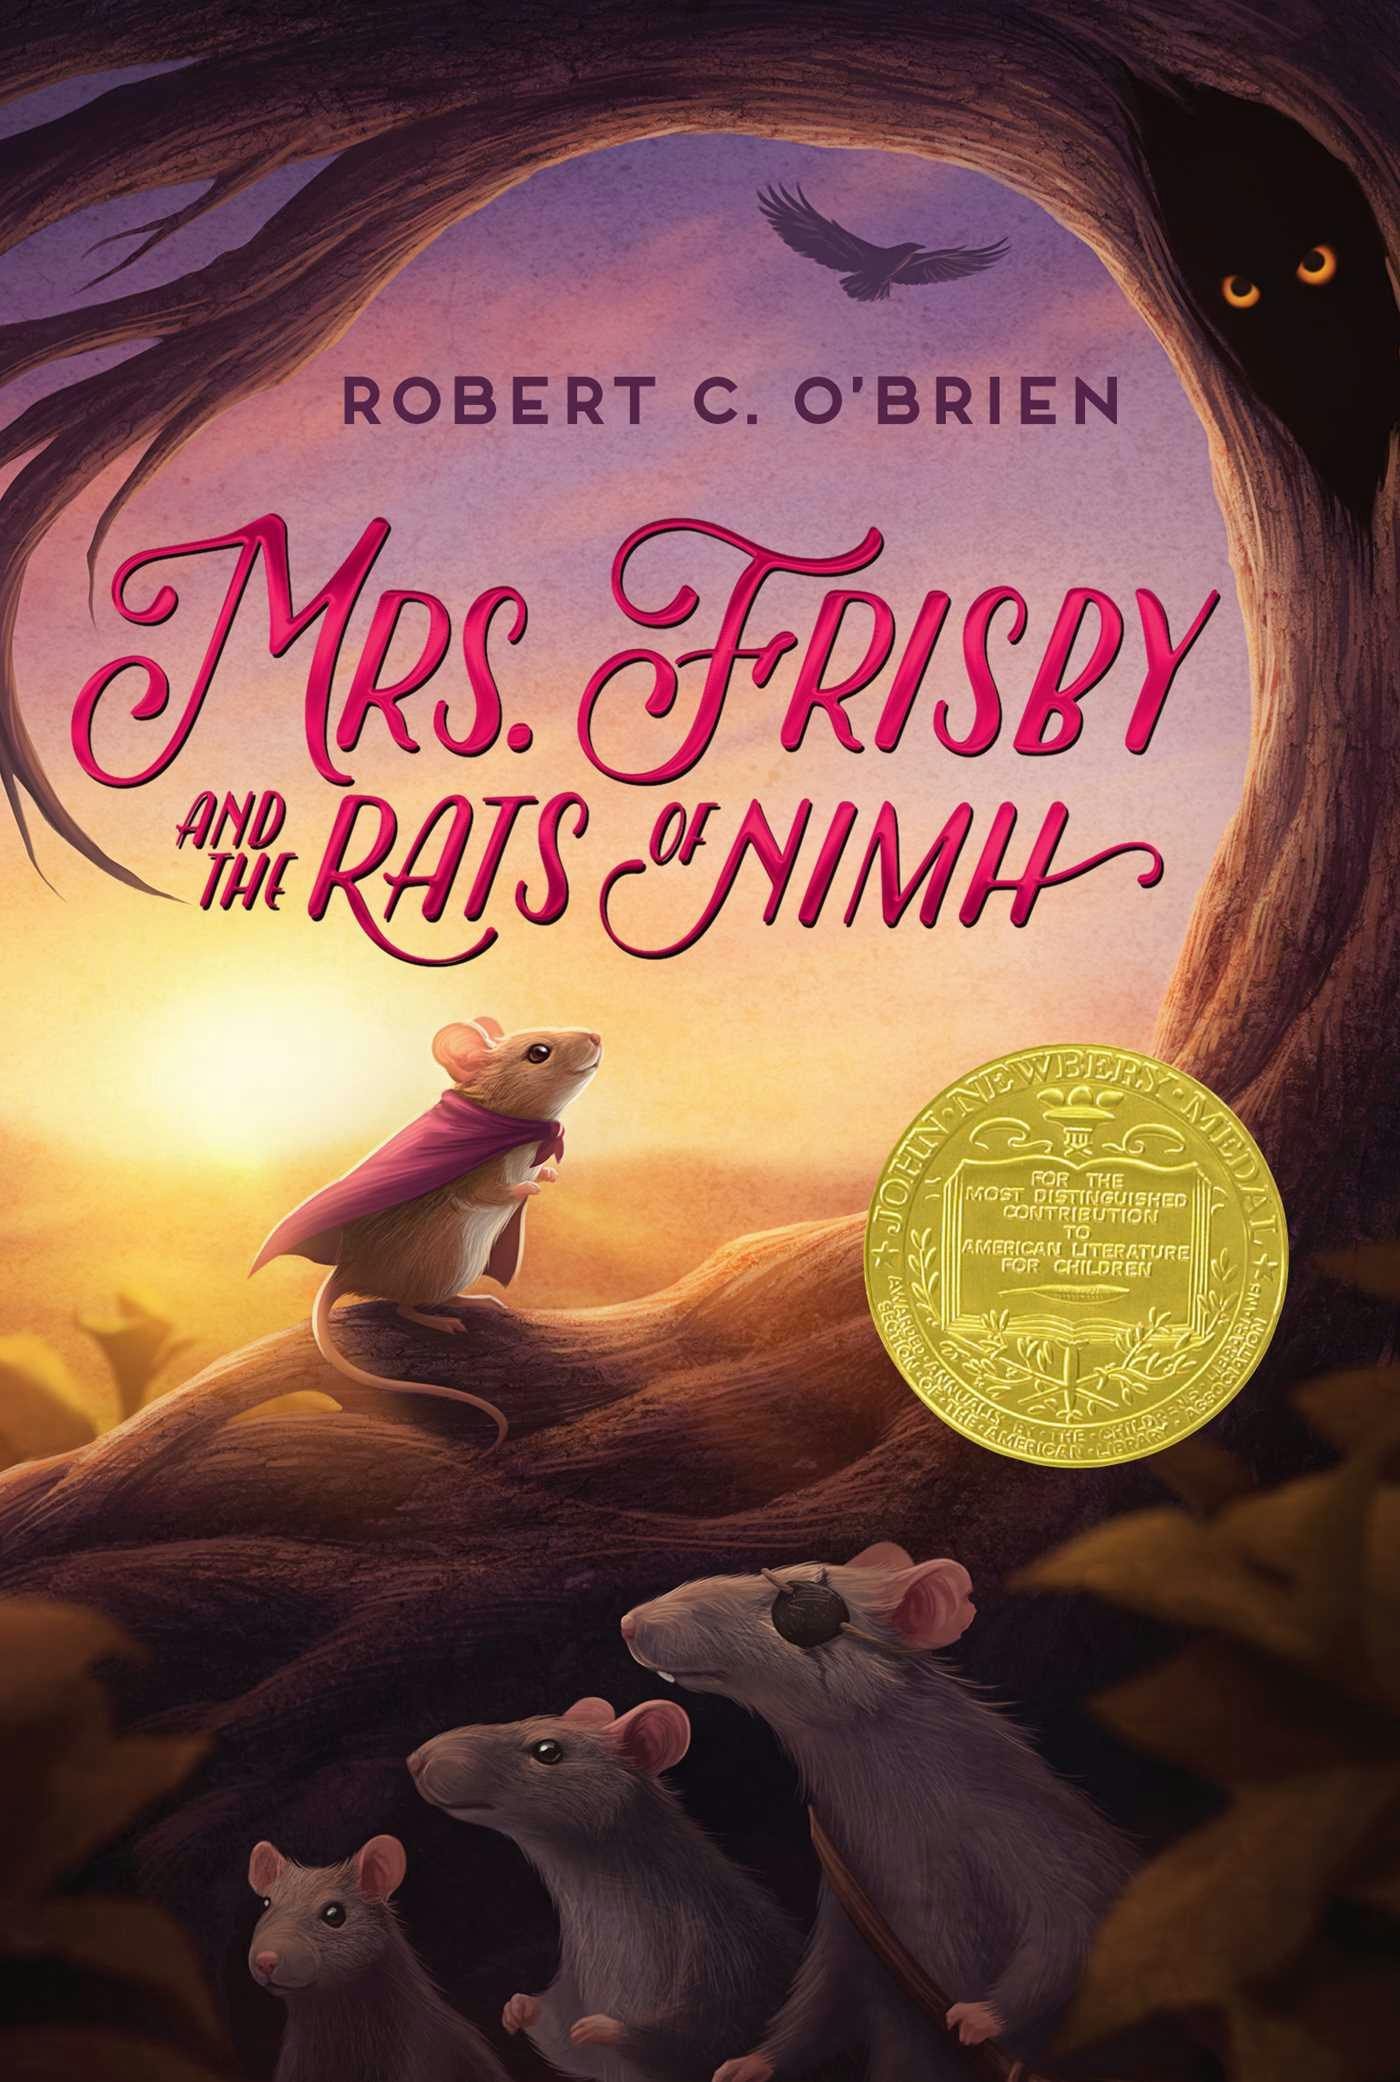 Mrs. Frisby and the Rats of Nimh - Robert C. O'Brien